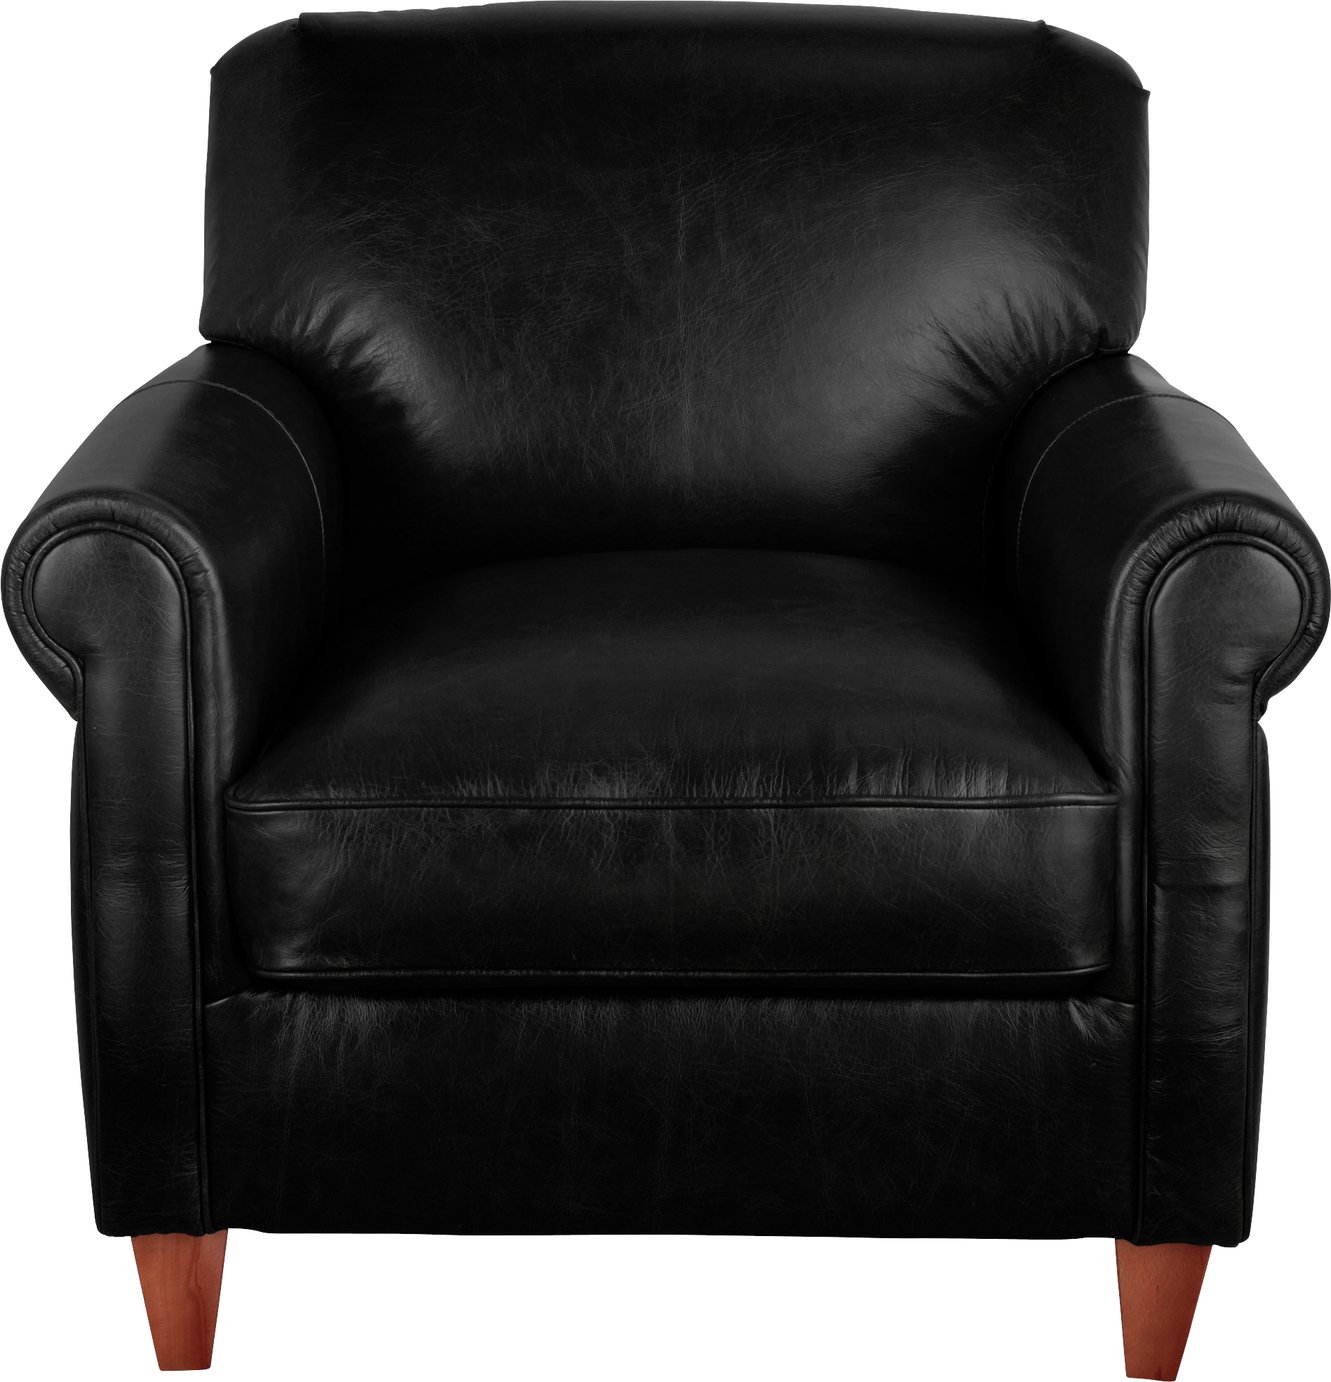 Argos Home Kingsley Leather Accent Chair - Black